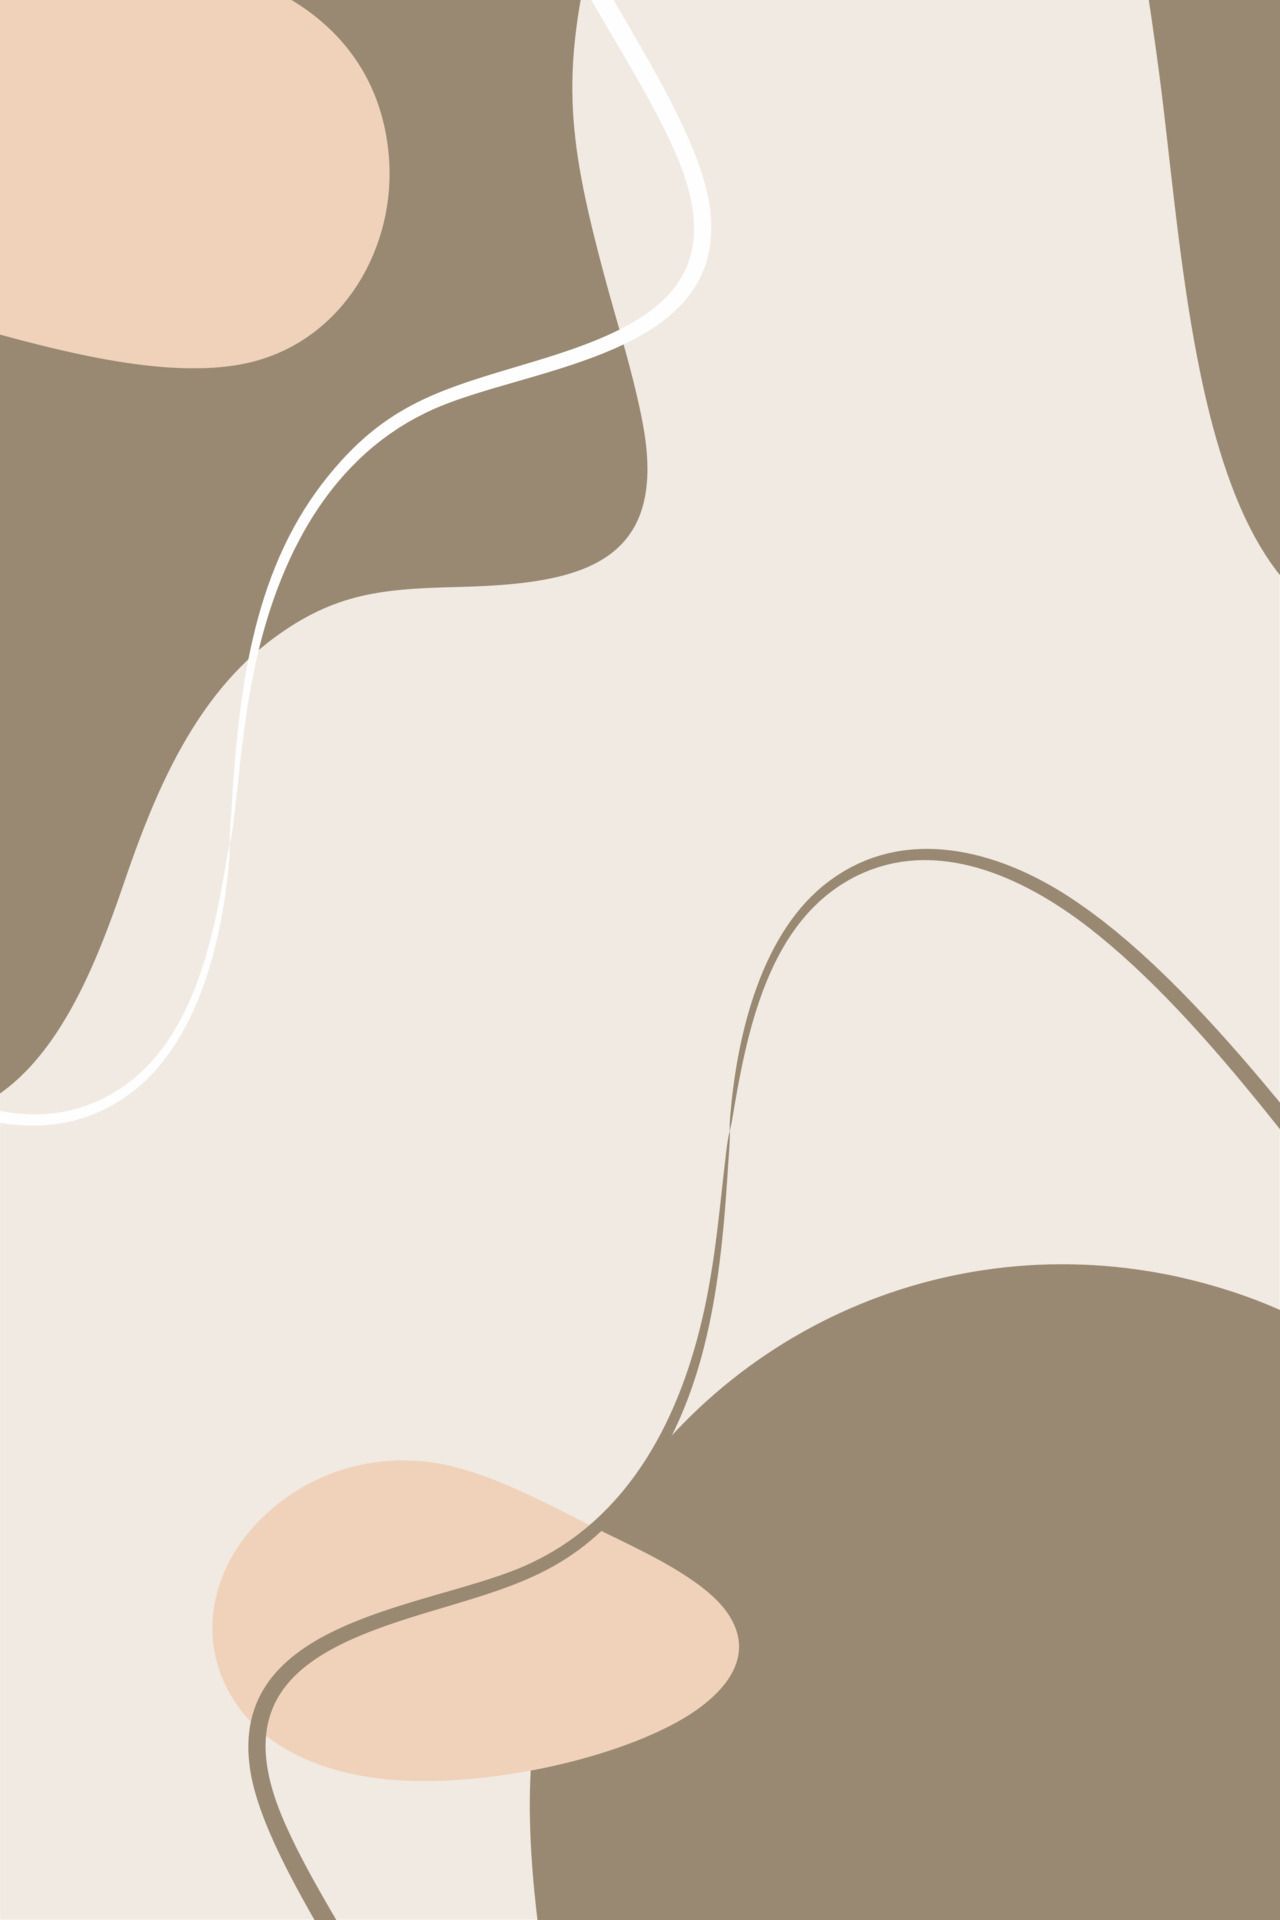 A graphic with a light background and abstract shapes in beige and brown. - Terracotta